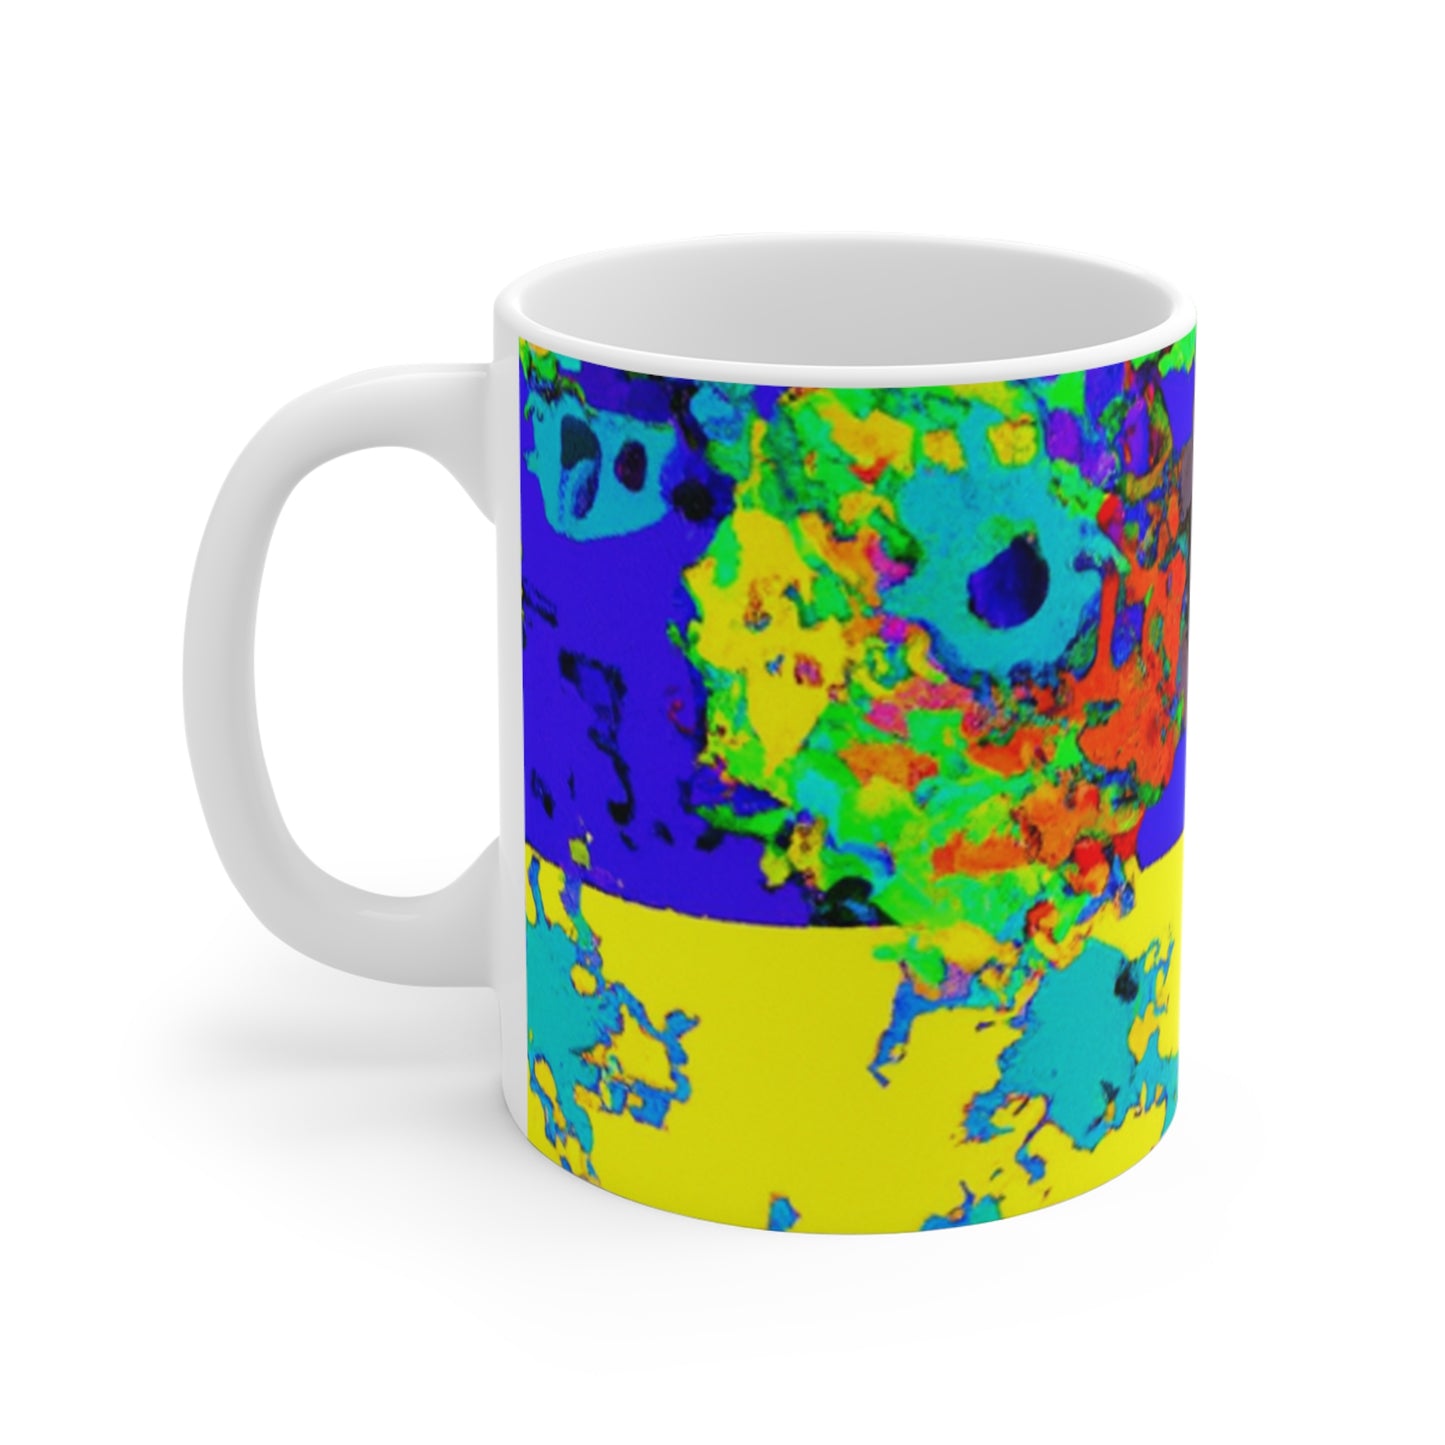 Gus & Roz's Roastery - Psychedelic Coffee Cup Mug 11 Ounce